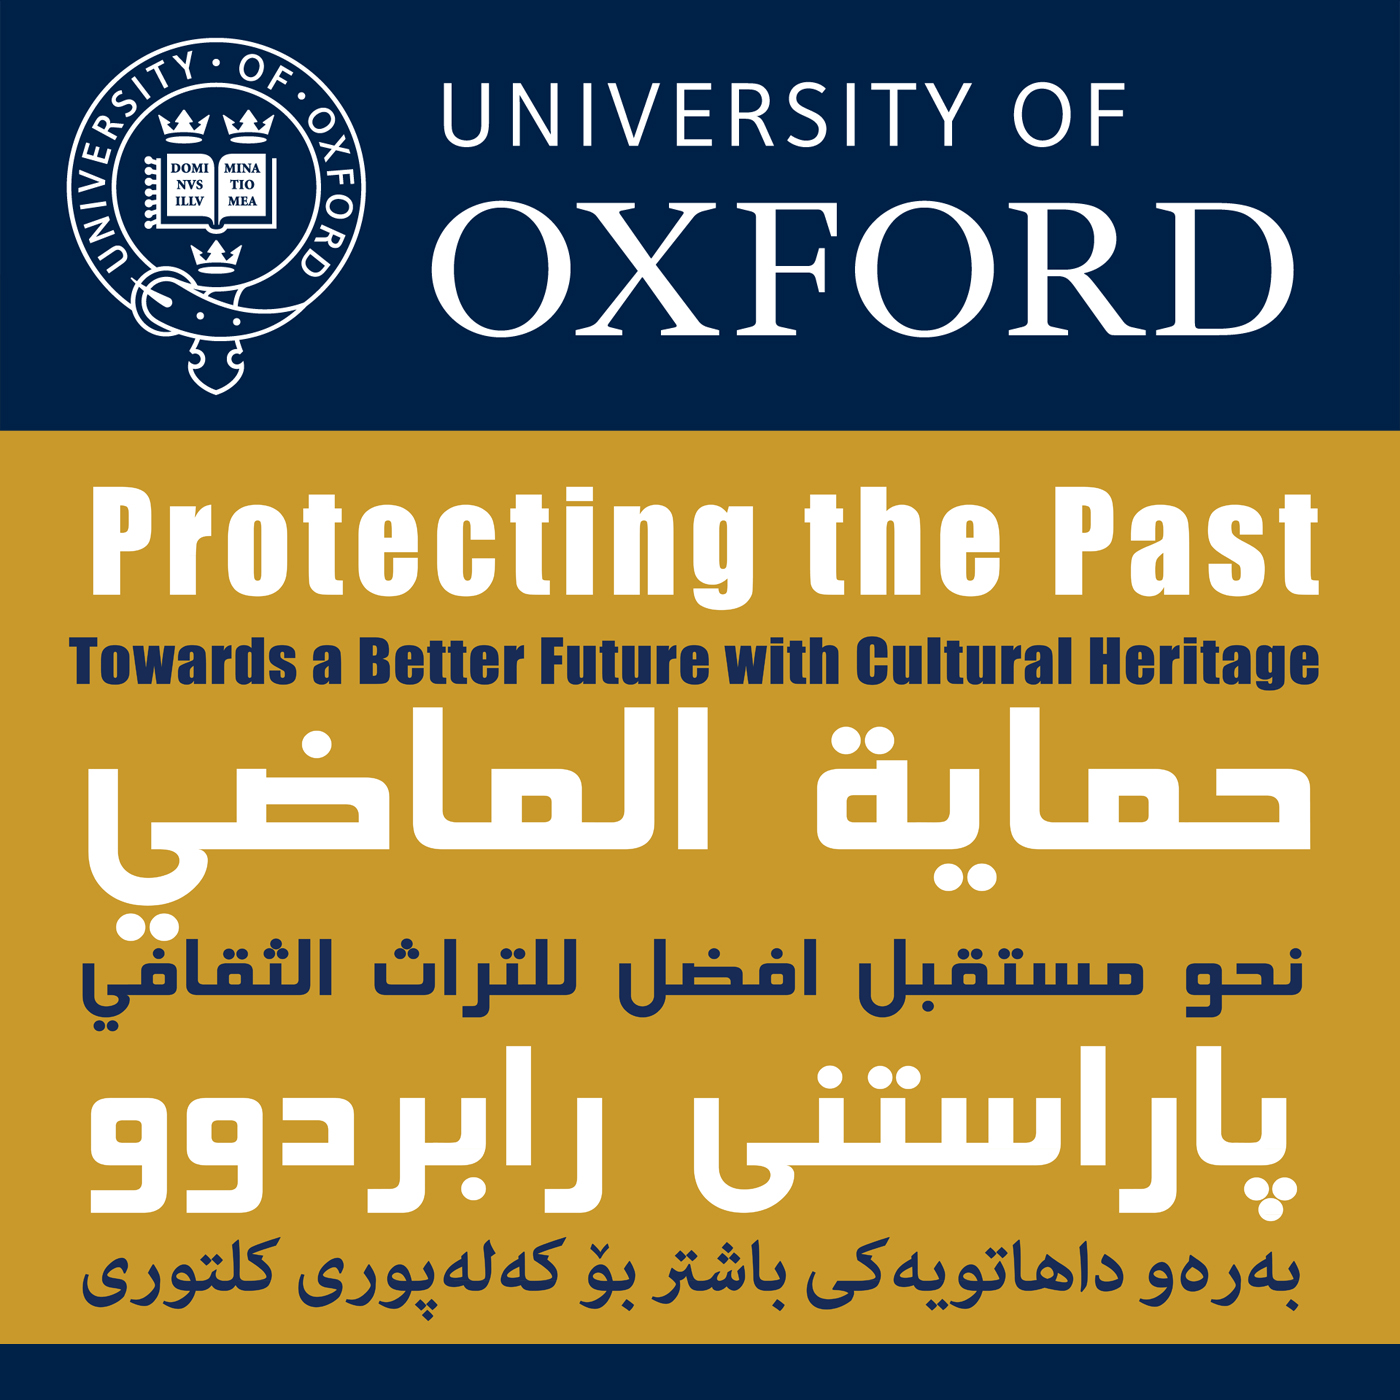 Protecting the Past 2 - Towards a better future with cultural heritage